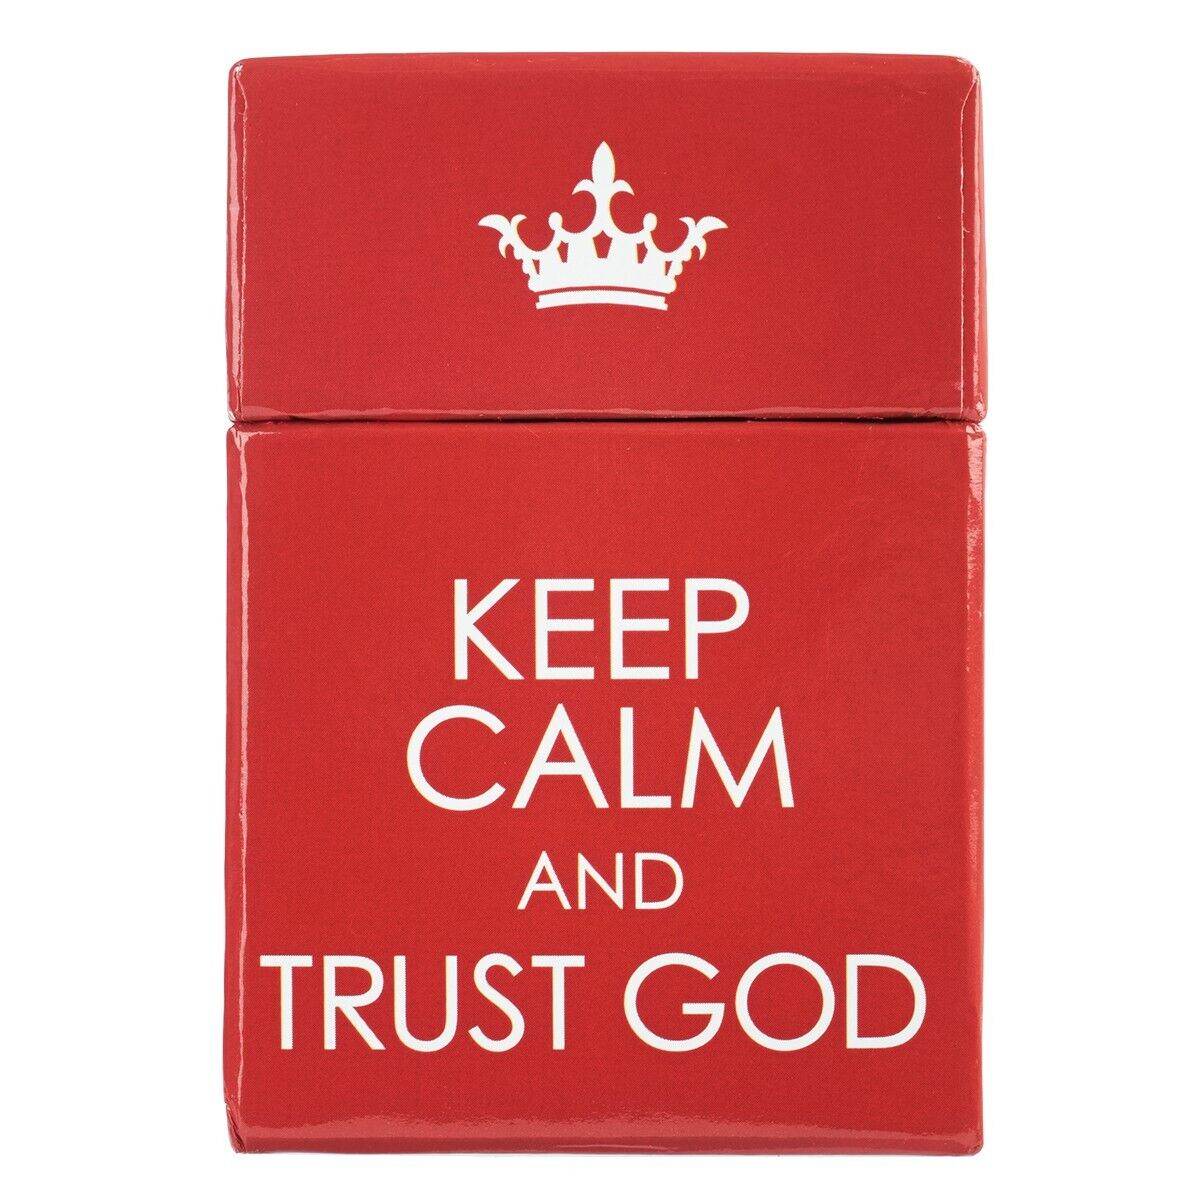 Keep Calm & Trust God, Inspirational Scripture Cards to Keep or Share